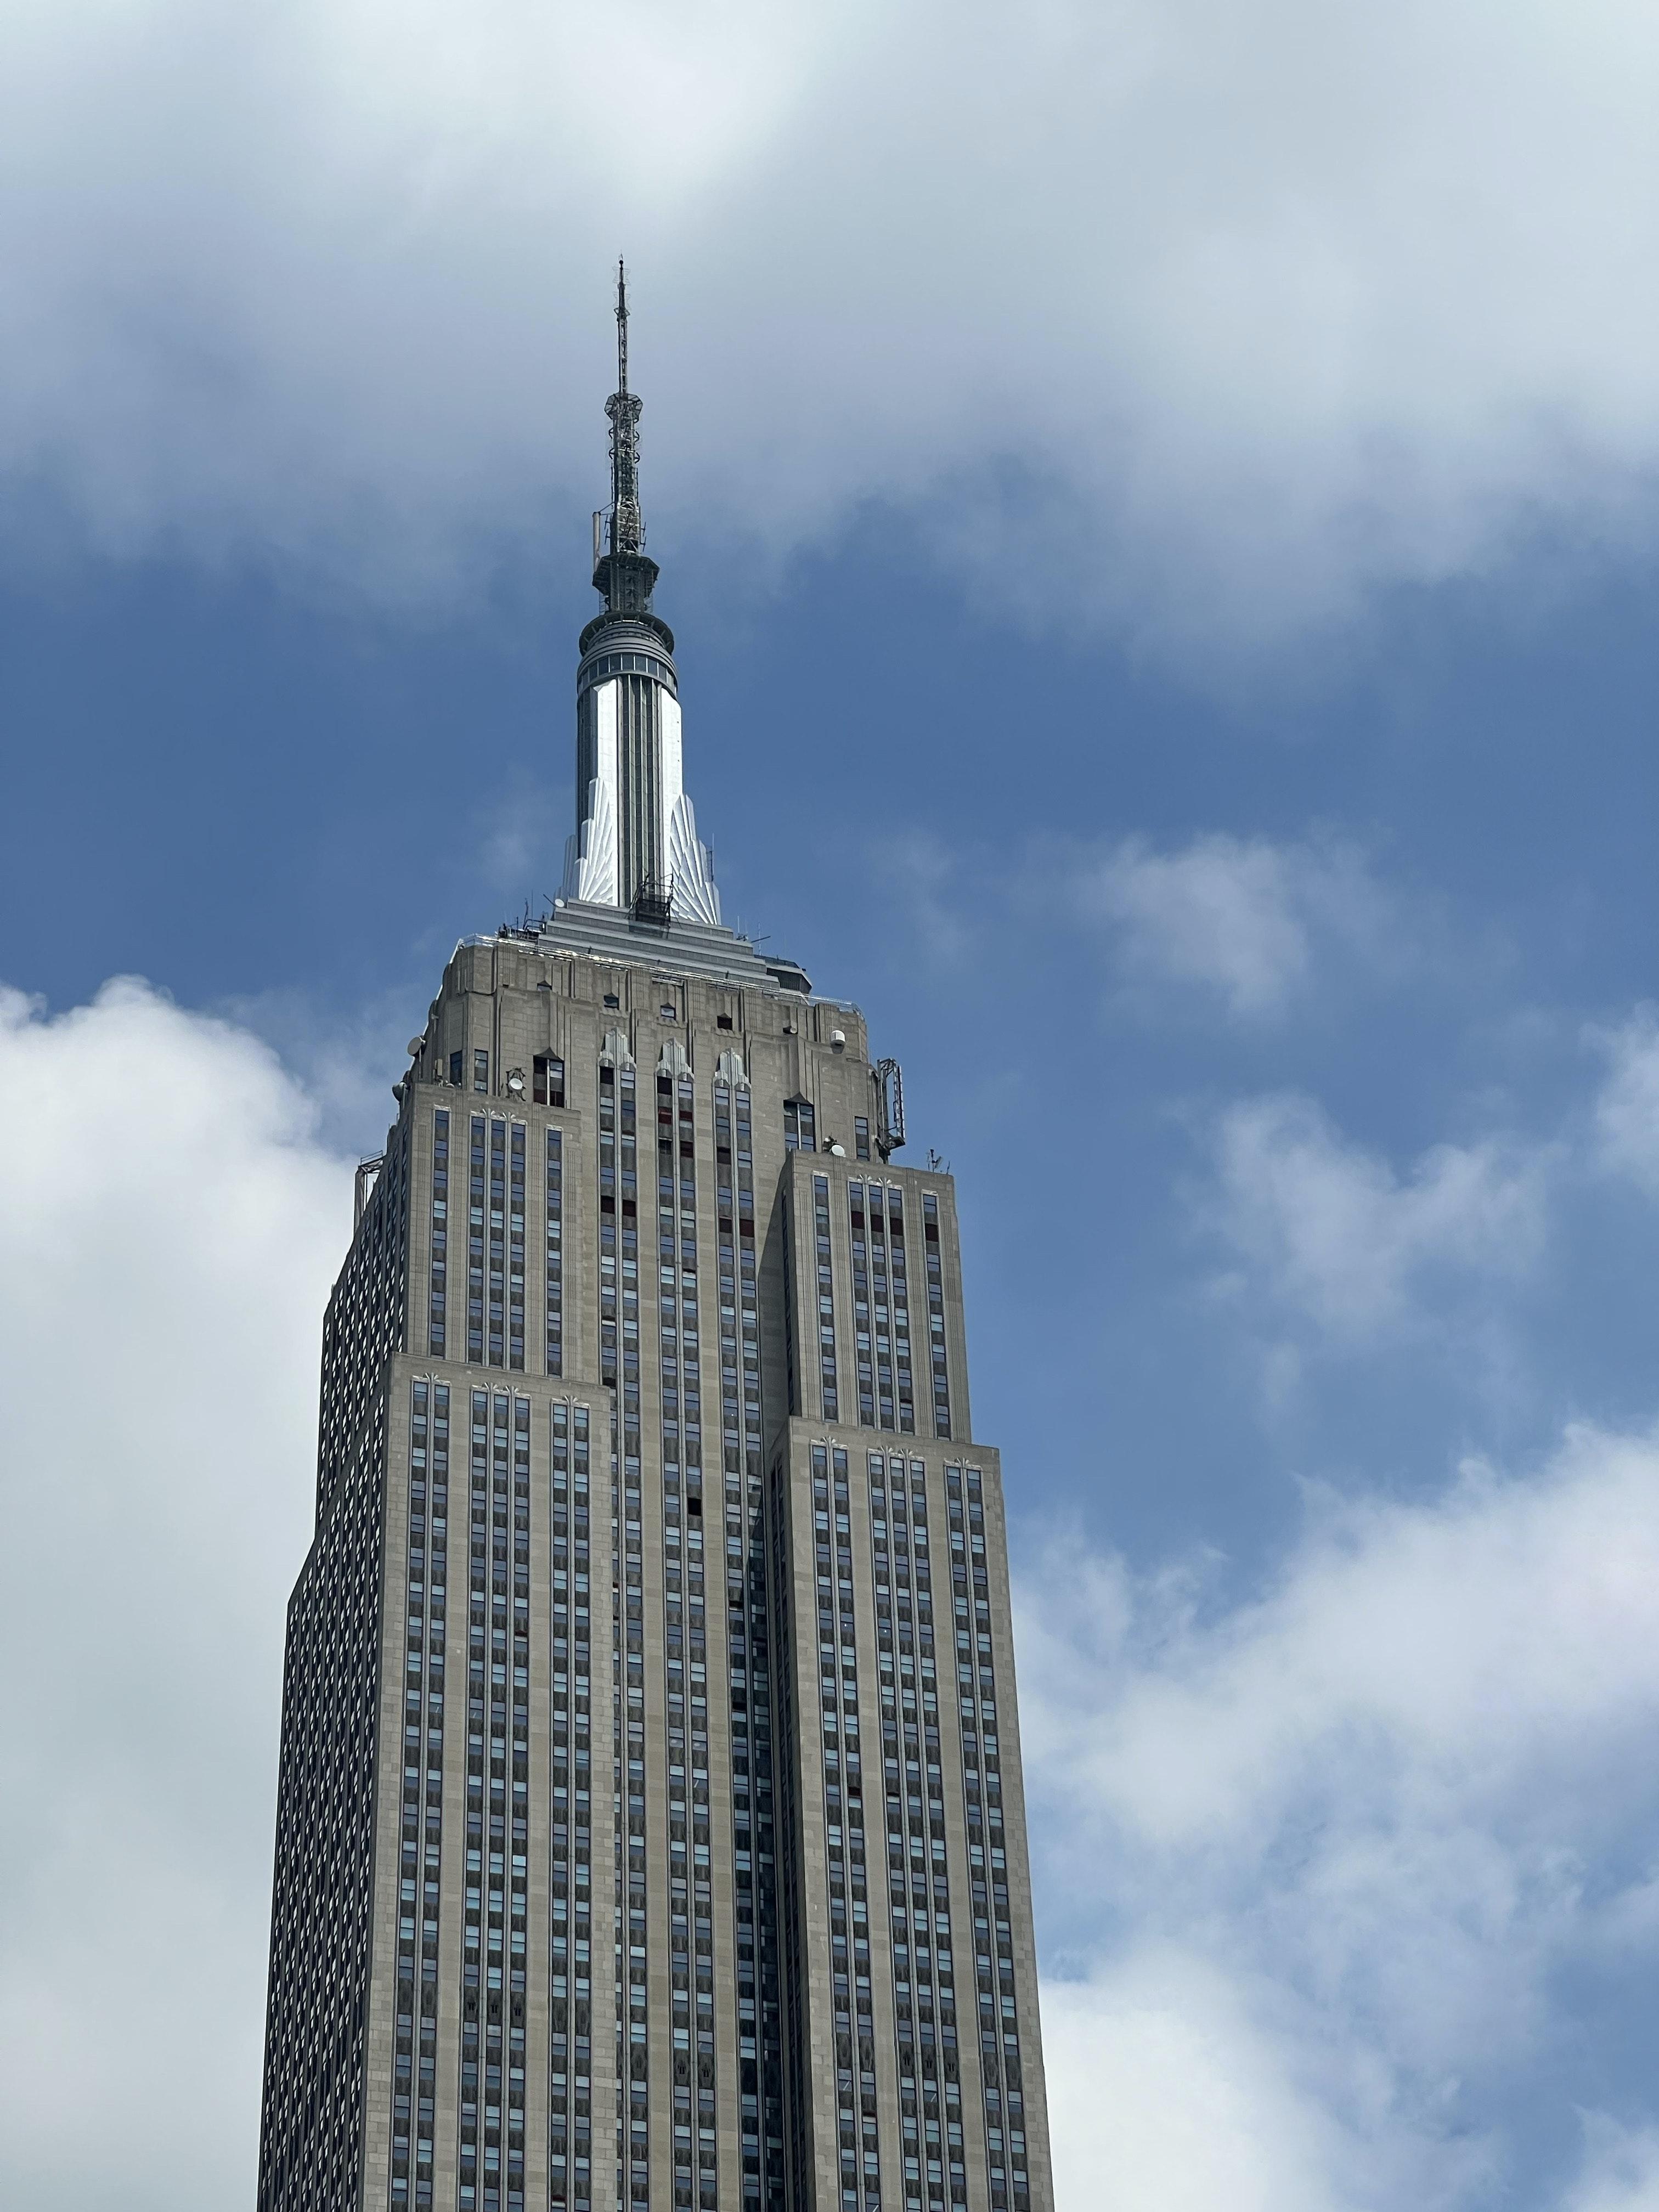 What happens when you jump off the Empire State Building? 